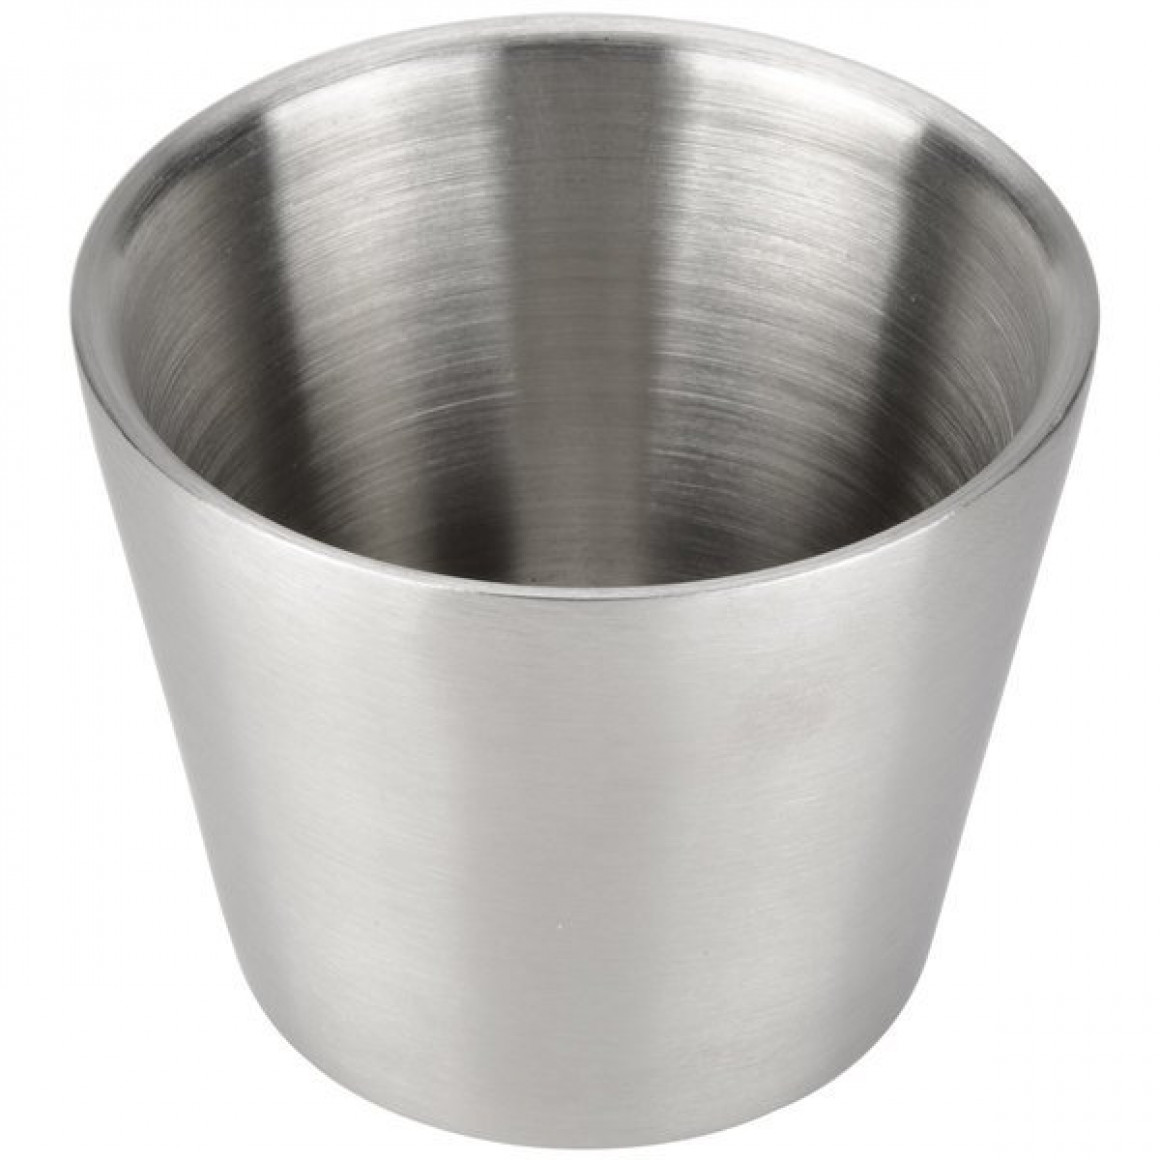 SAUCE CUP, STAINLESS STEEL, DOUBLE WALL, 7 OZ.